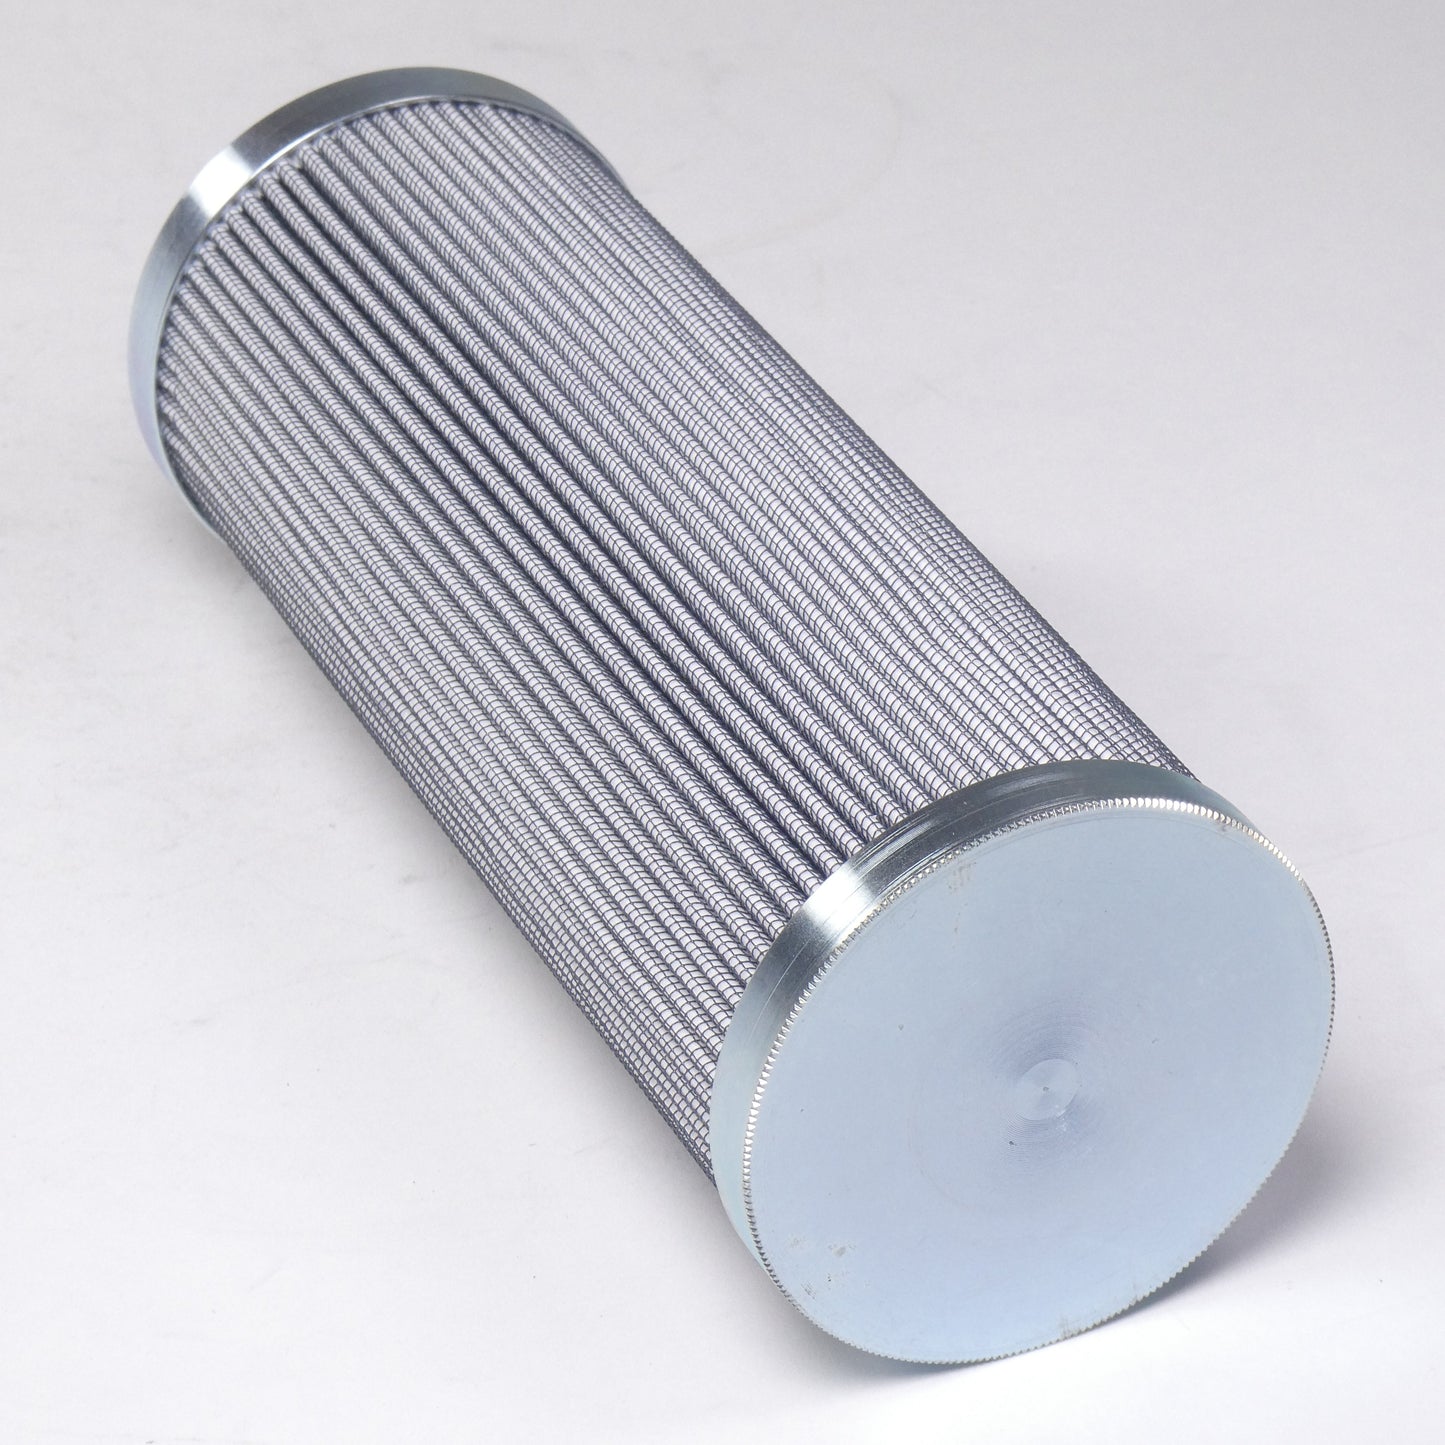 Hydrafil Replacement Filter Element for Pall AC9601FUP8Z